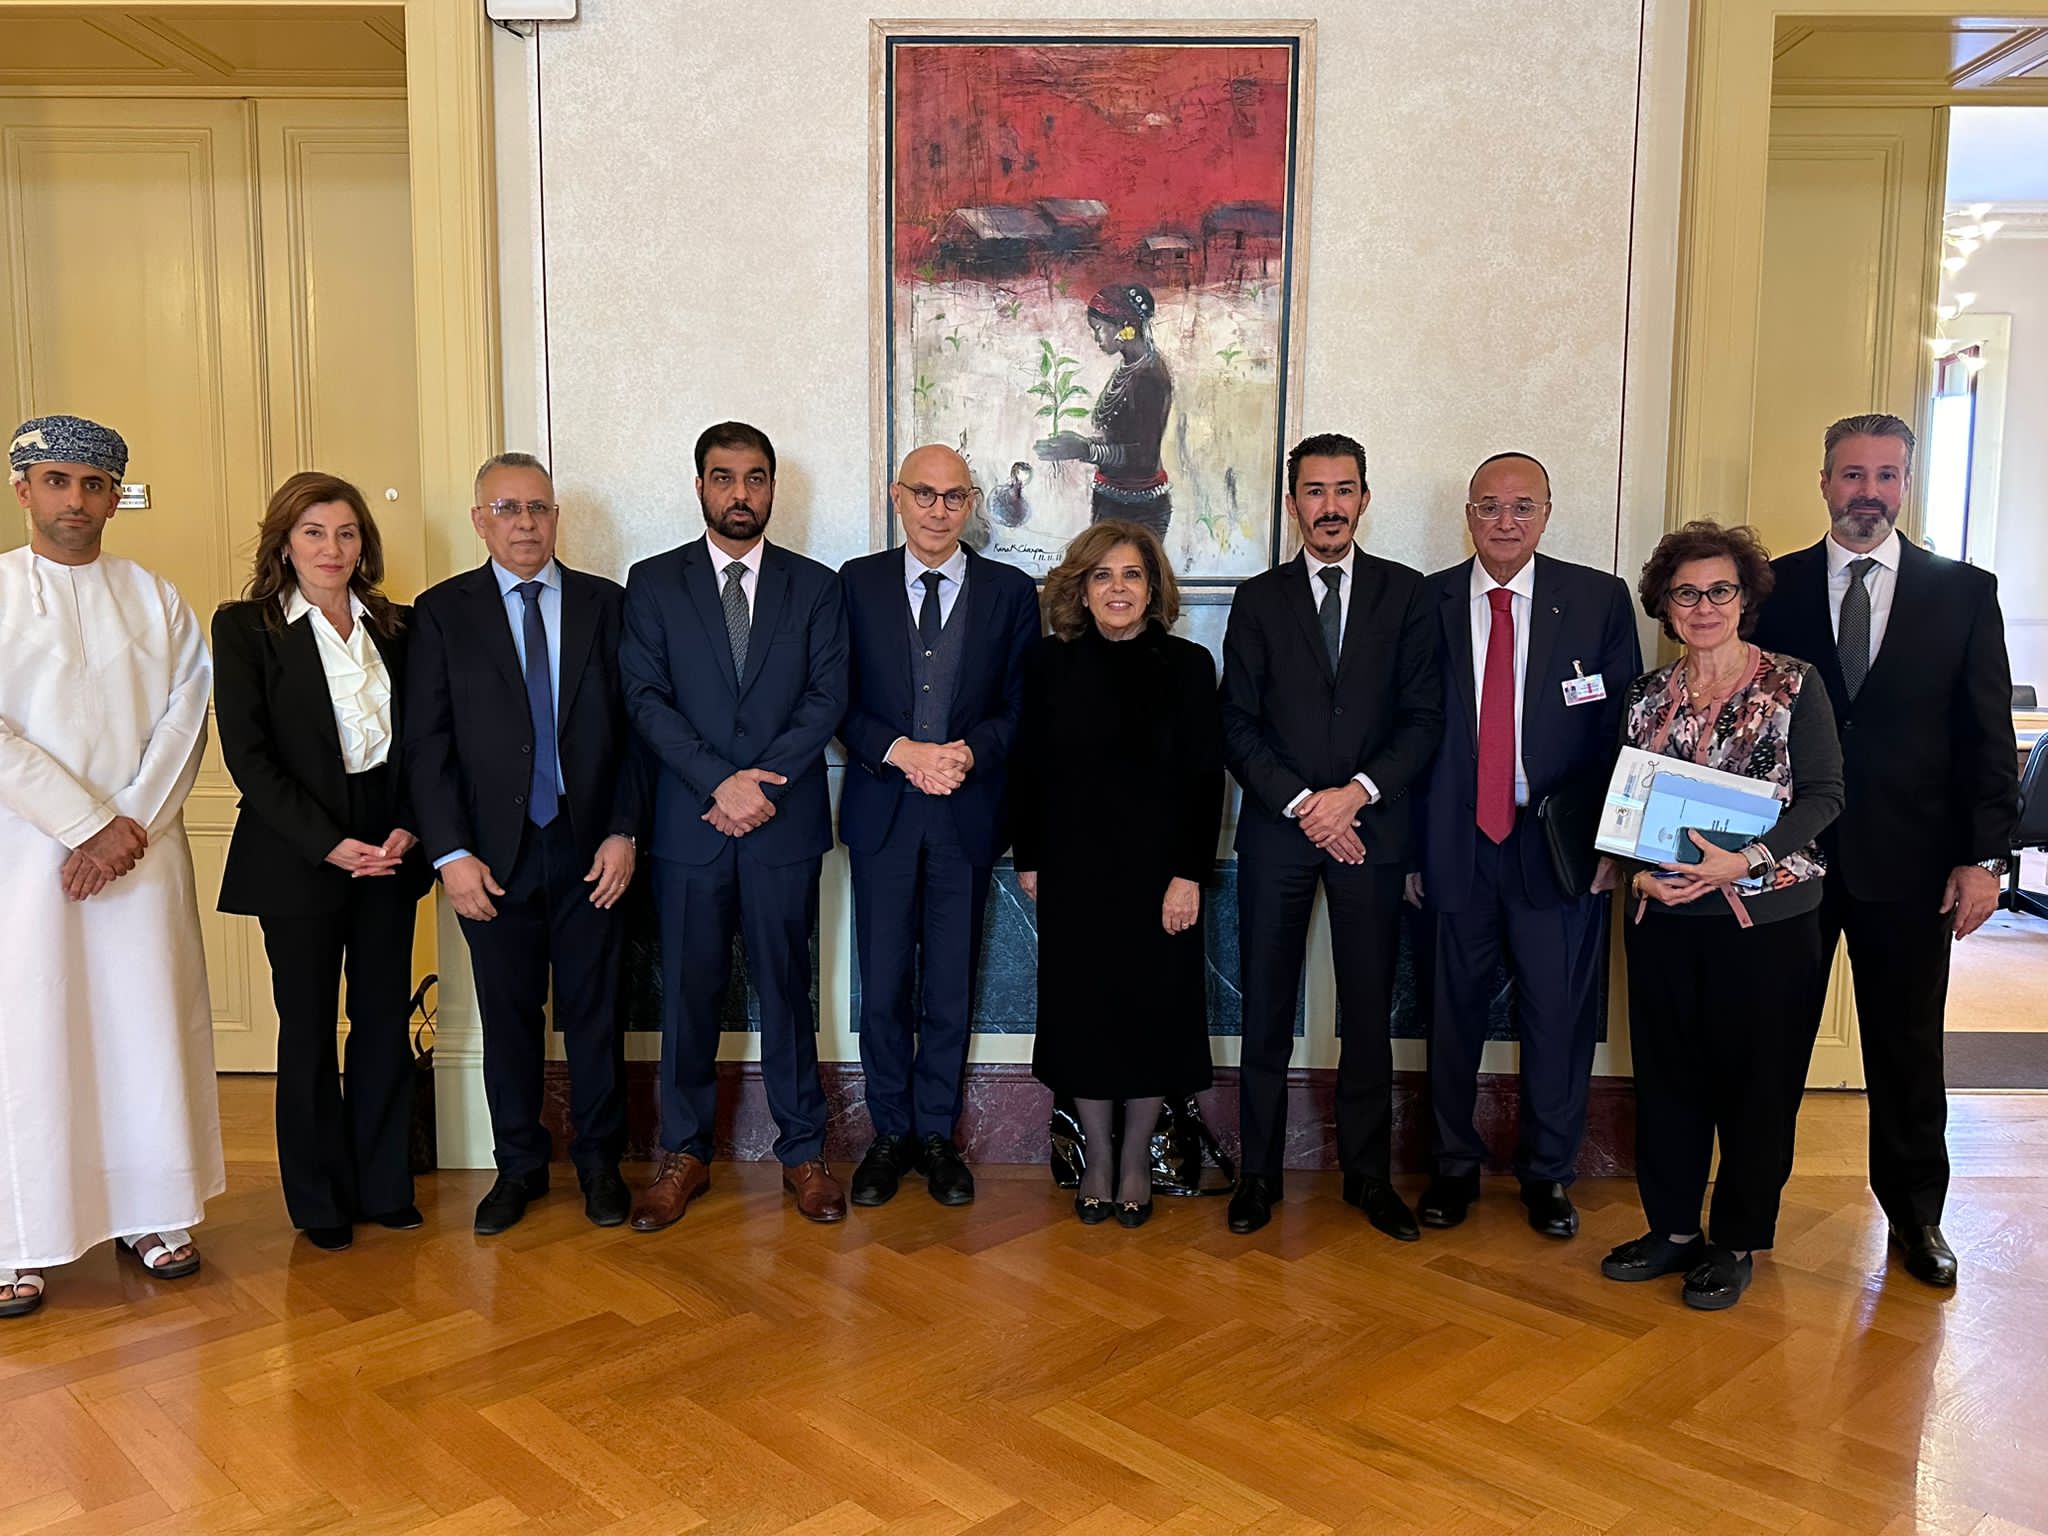  Press release of the meeting of the delegation of the Arab Network of National Human Rights Institutions with the High Commissioner for Human Rights in Geneva to discuss responses to developments in the situation in Gaza 